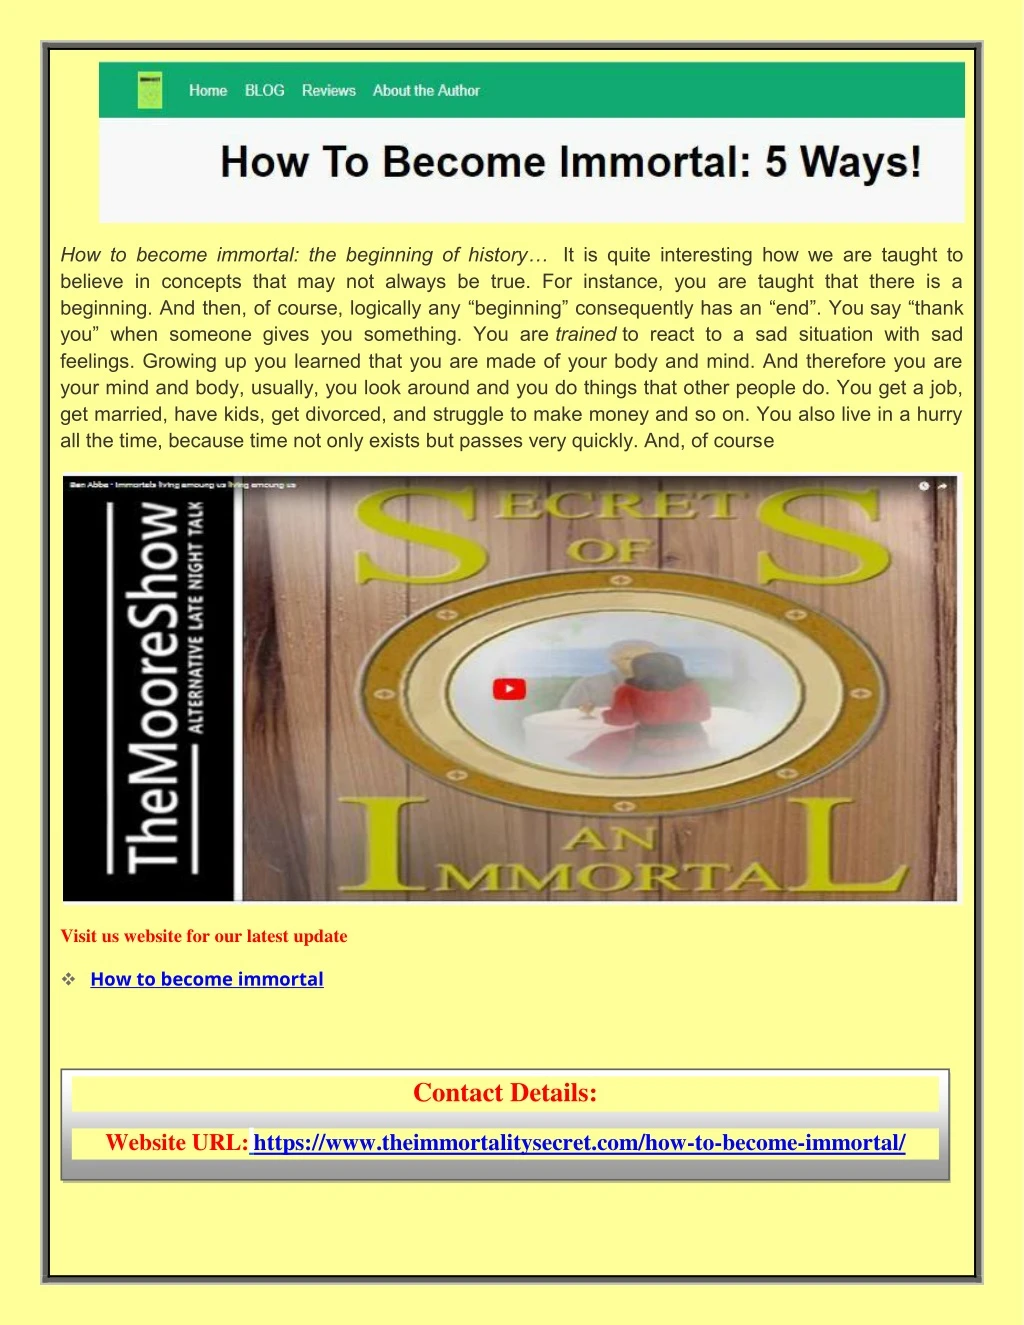 how to become immortal the beginning of history